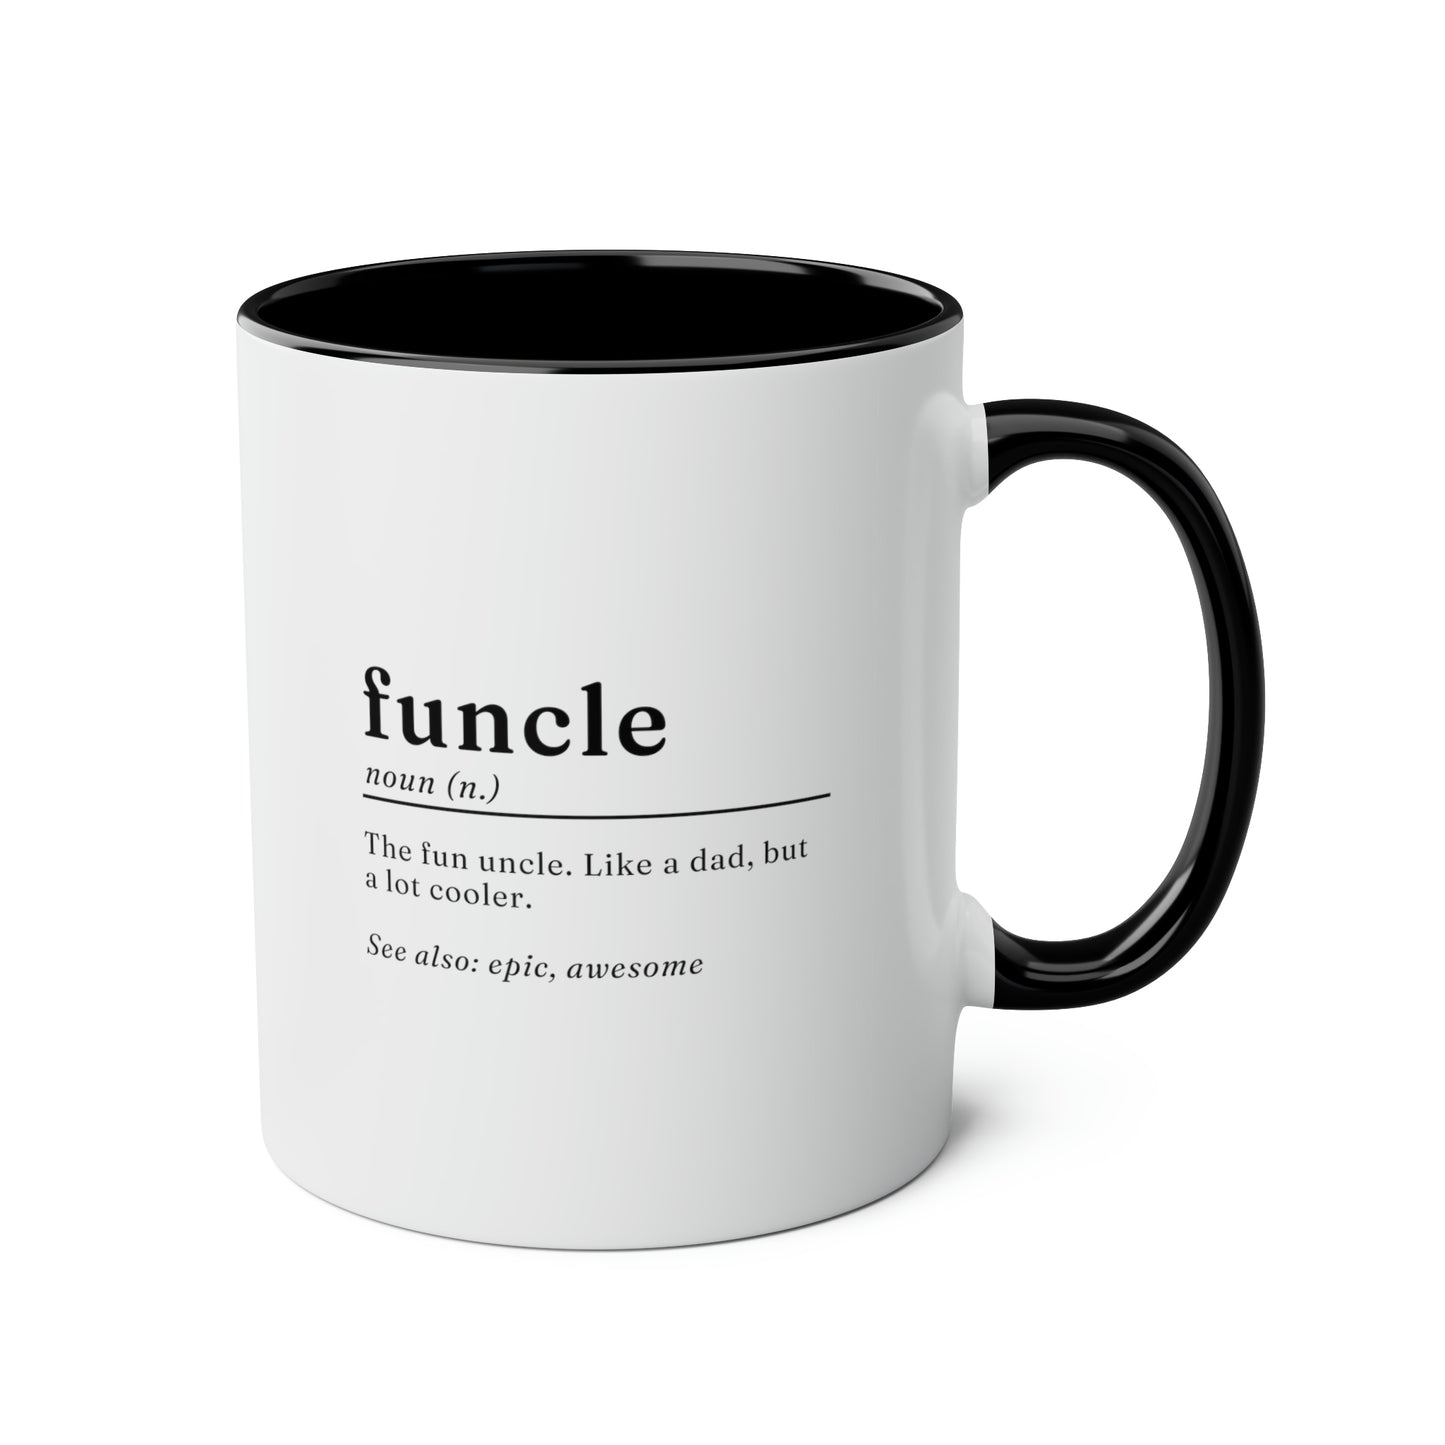 Funcle Definition 11oz white with black accent funny large coffee mug gift for fun uncle custom from niece nephew waveywares wavey wares wavywares wavy wares